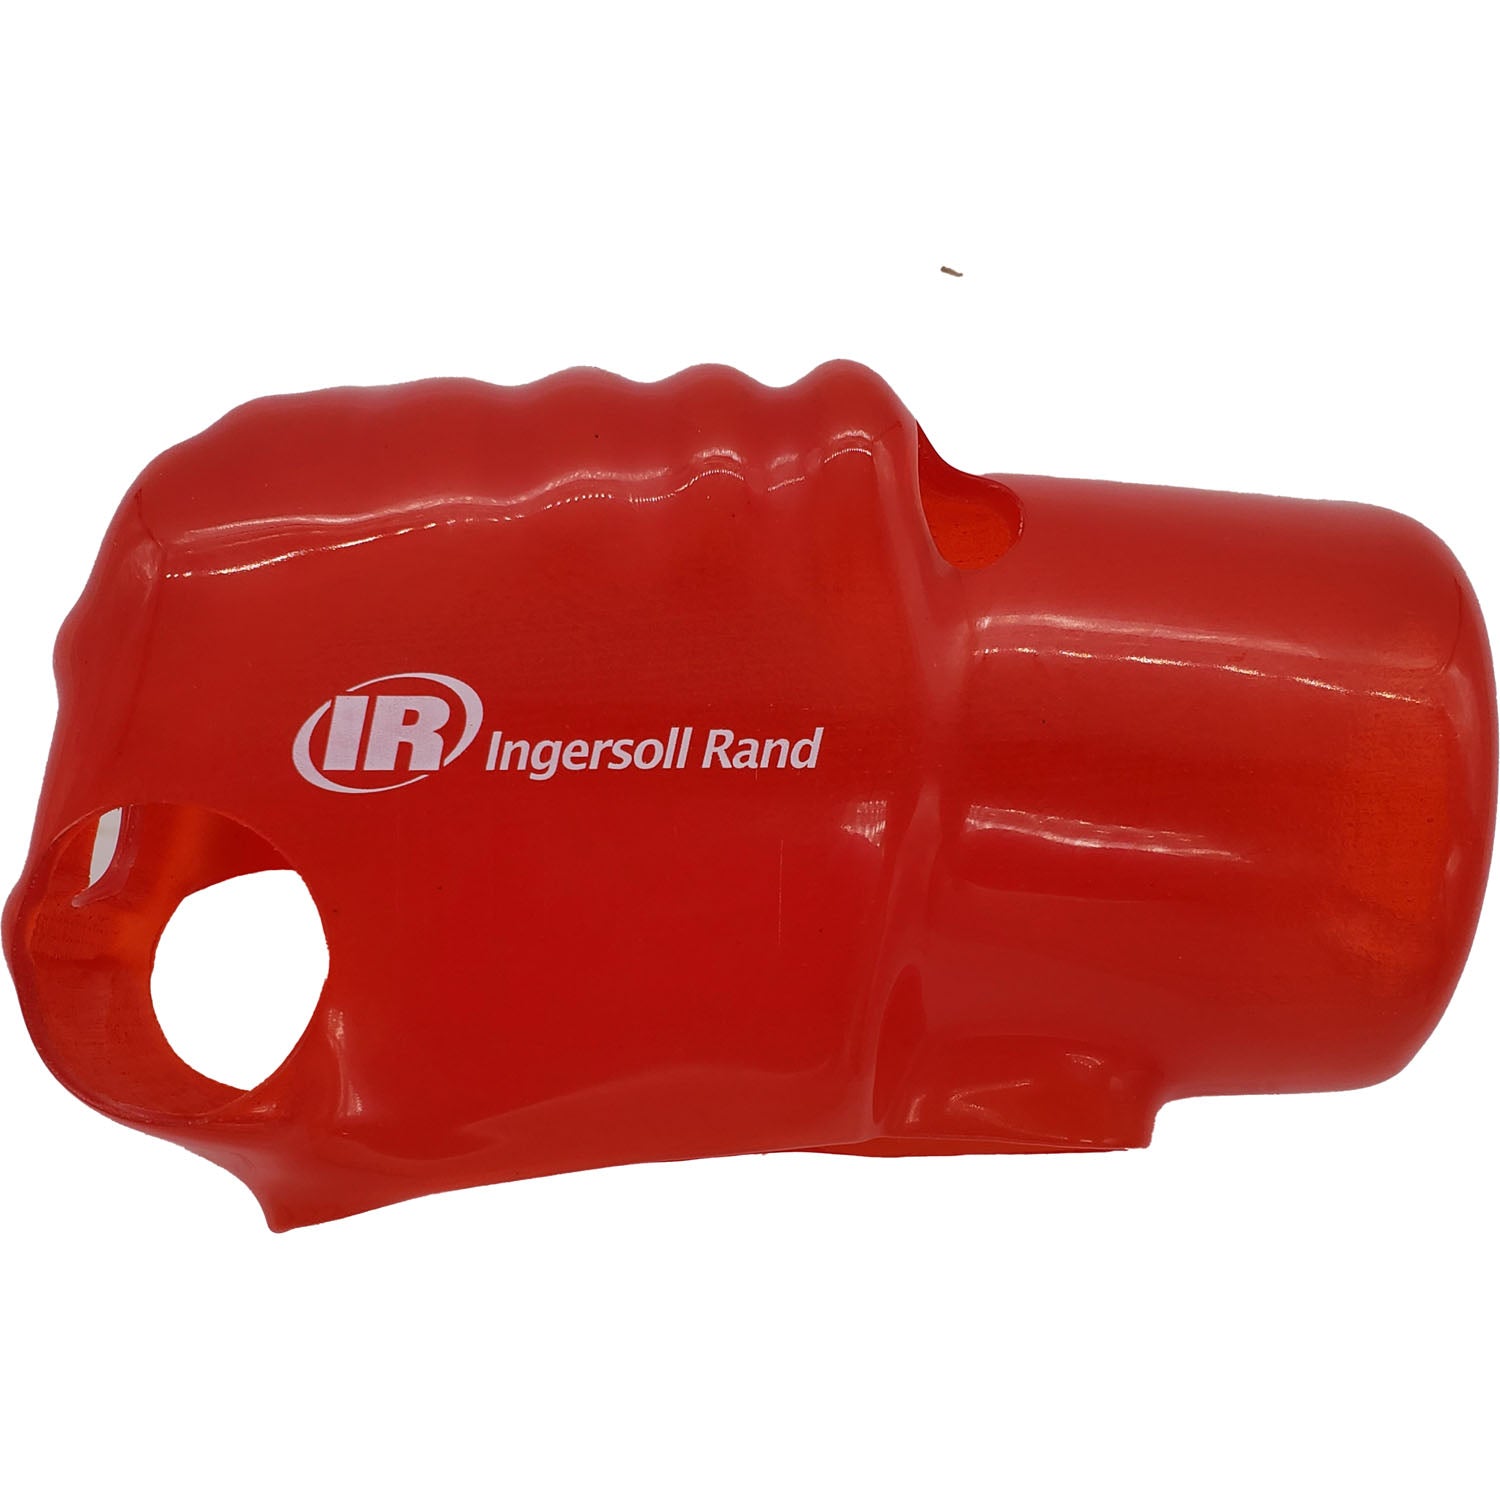 Ingersoll Rand 231-BOOT Protective Cover for 231 Series Impact Wrench